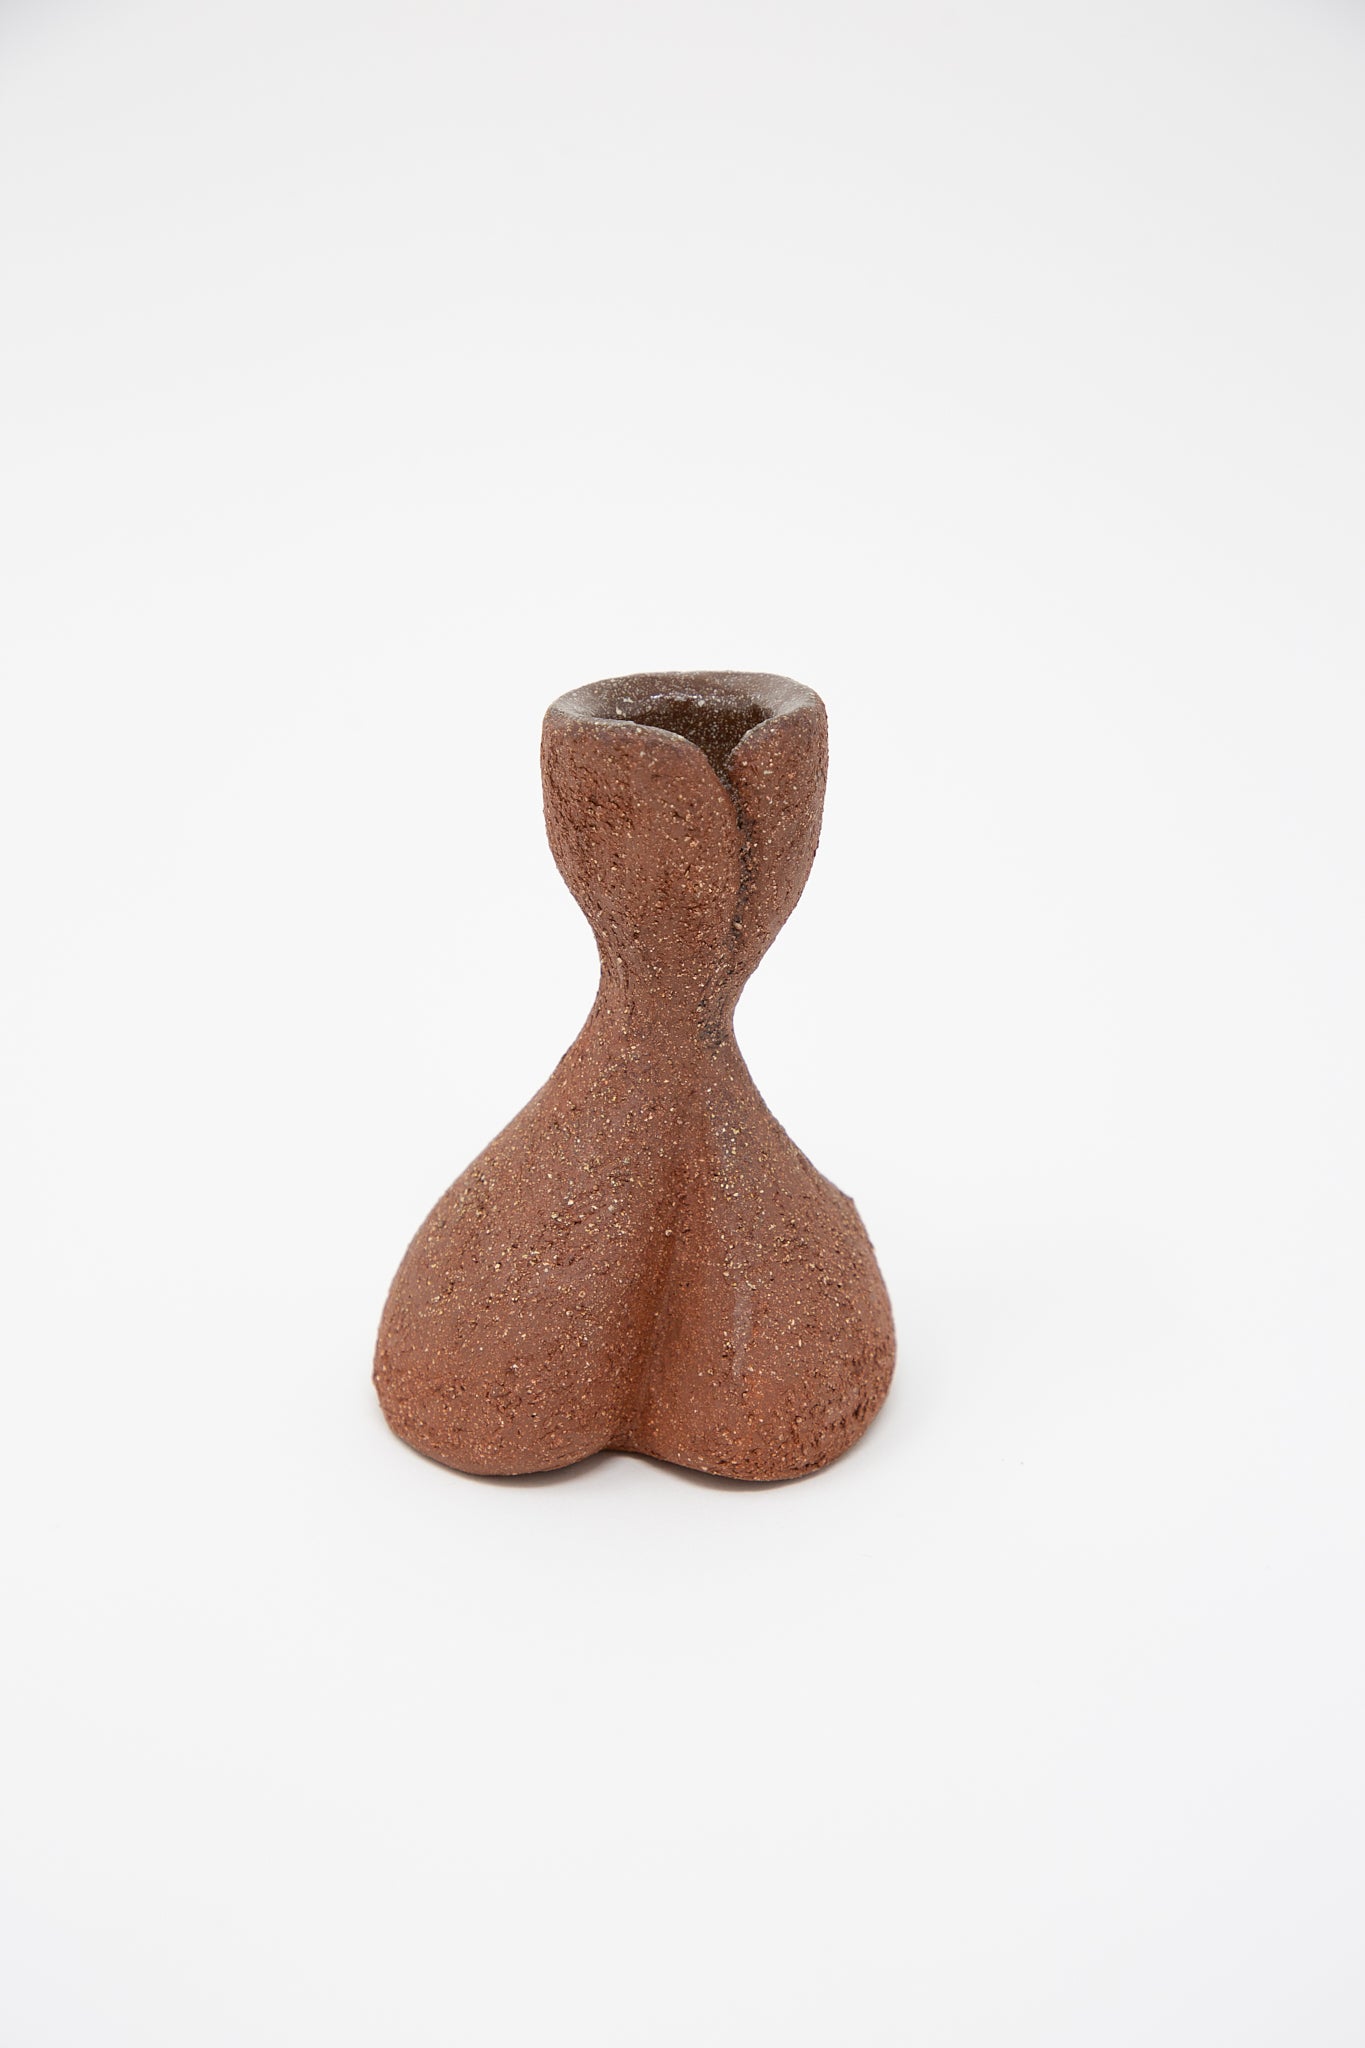 A small Hand Built Candlesticks in Terracotta Sculpture Clay vase on a white background by Lost Quarry.